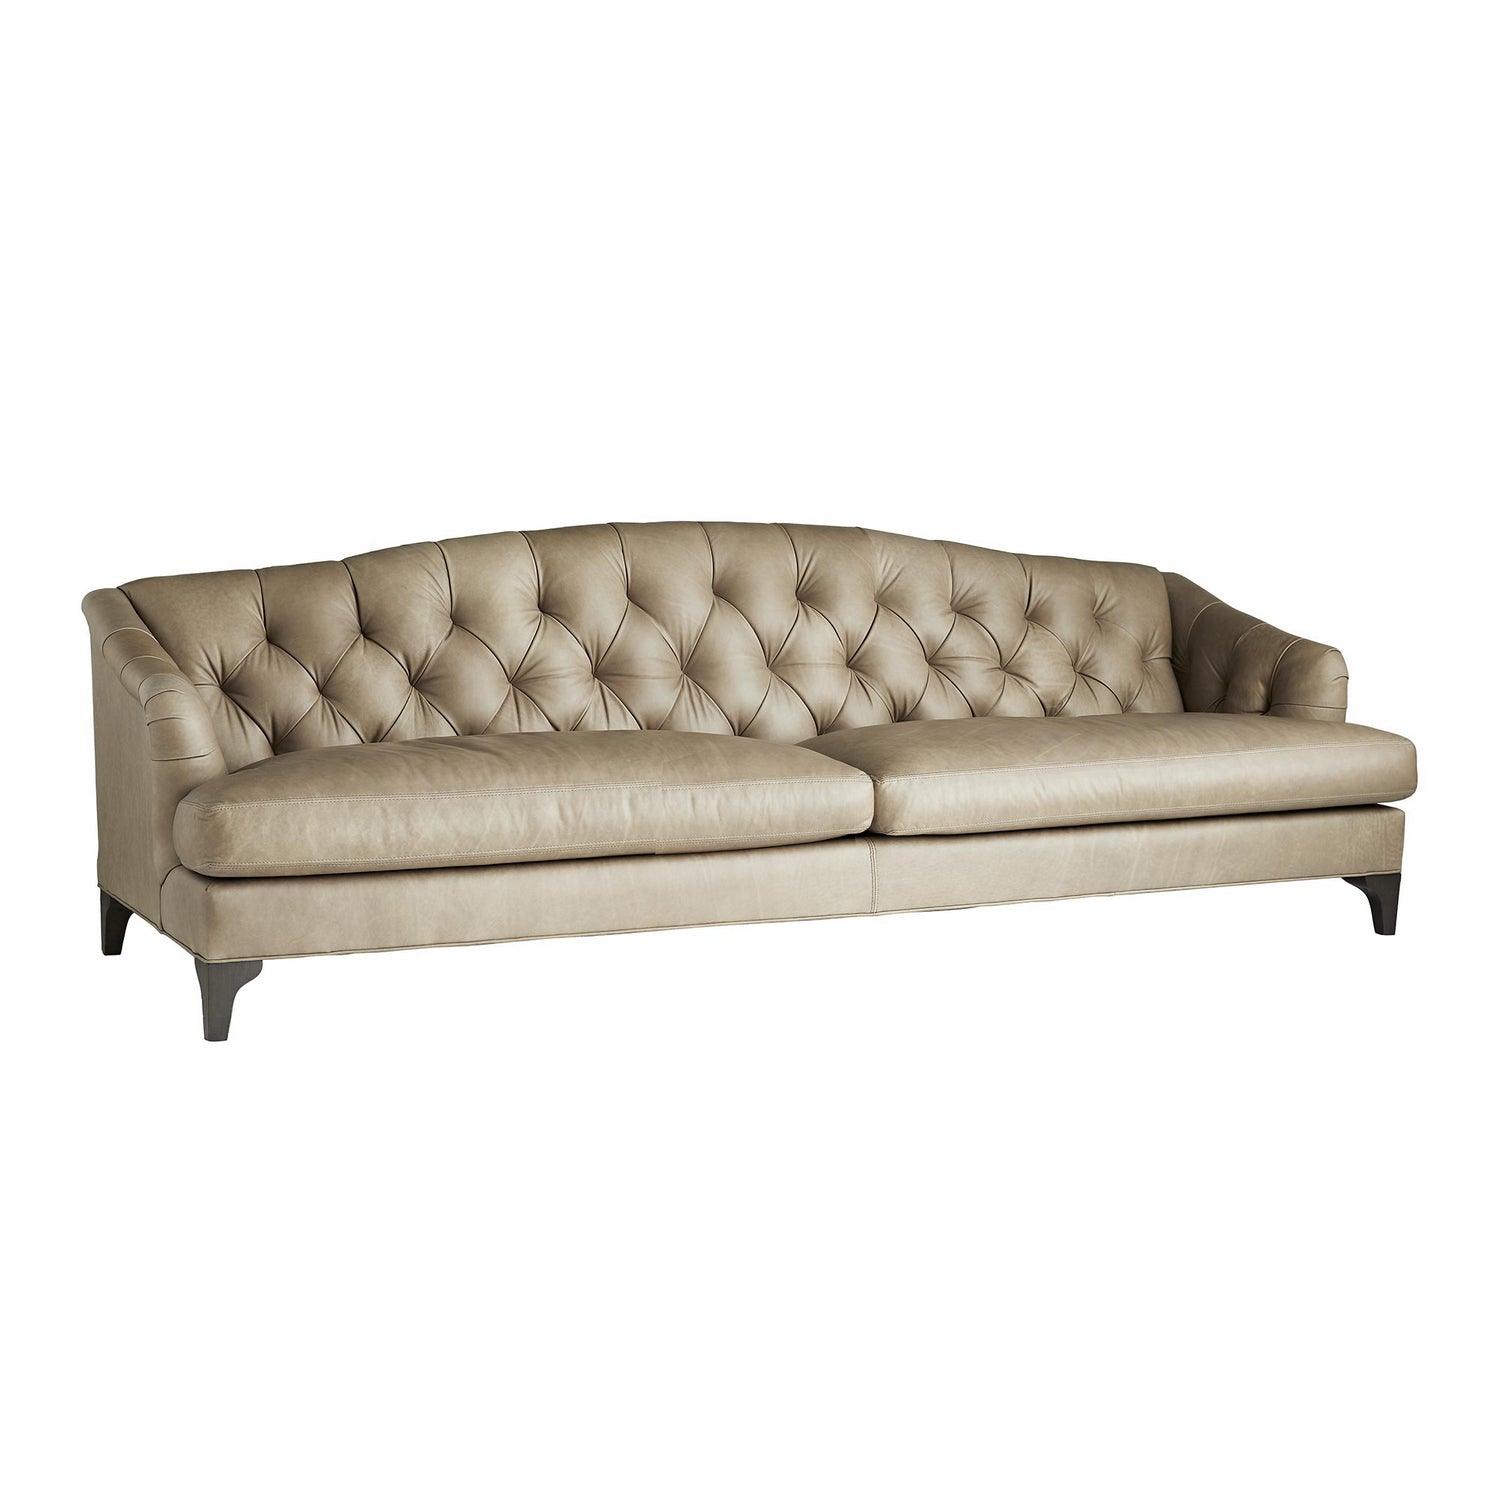 Sofa from the Klein collection in Mushroom Leather finish